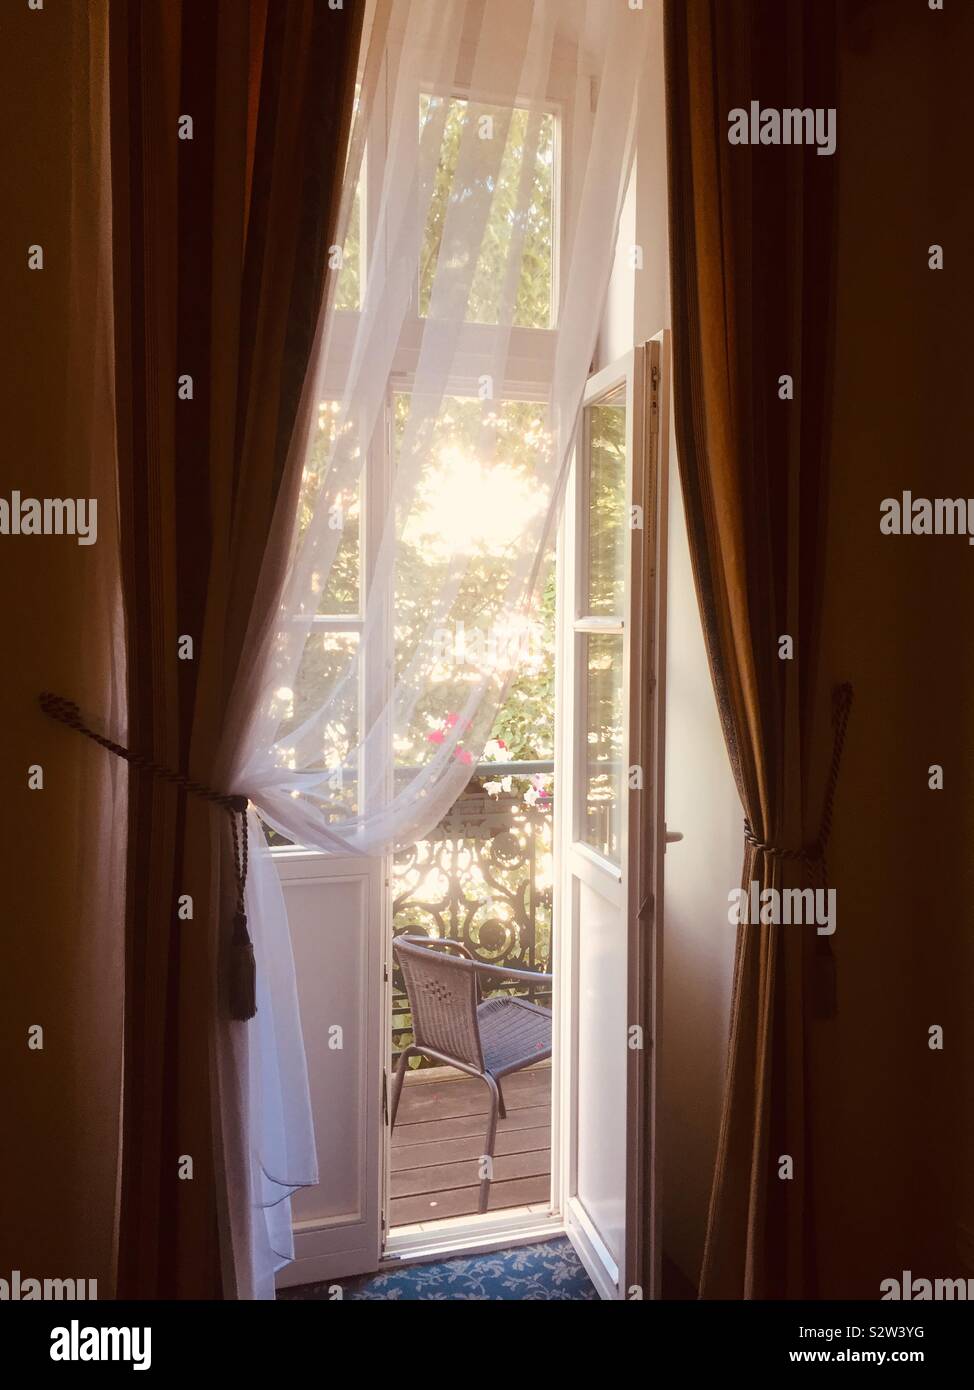 View through a balcony window with curtains of a chair and dappled sunlight. Stock Photo